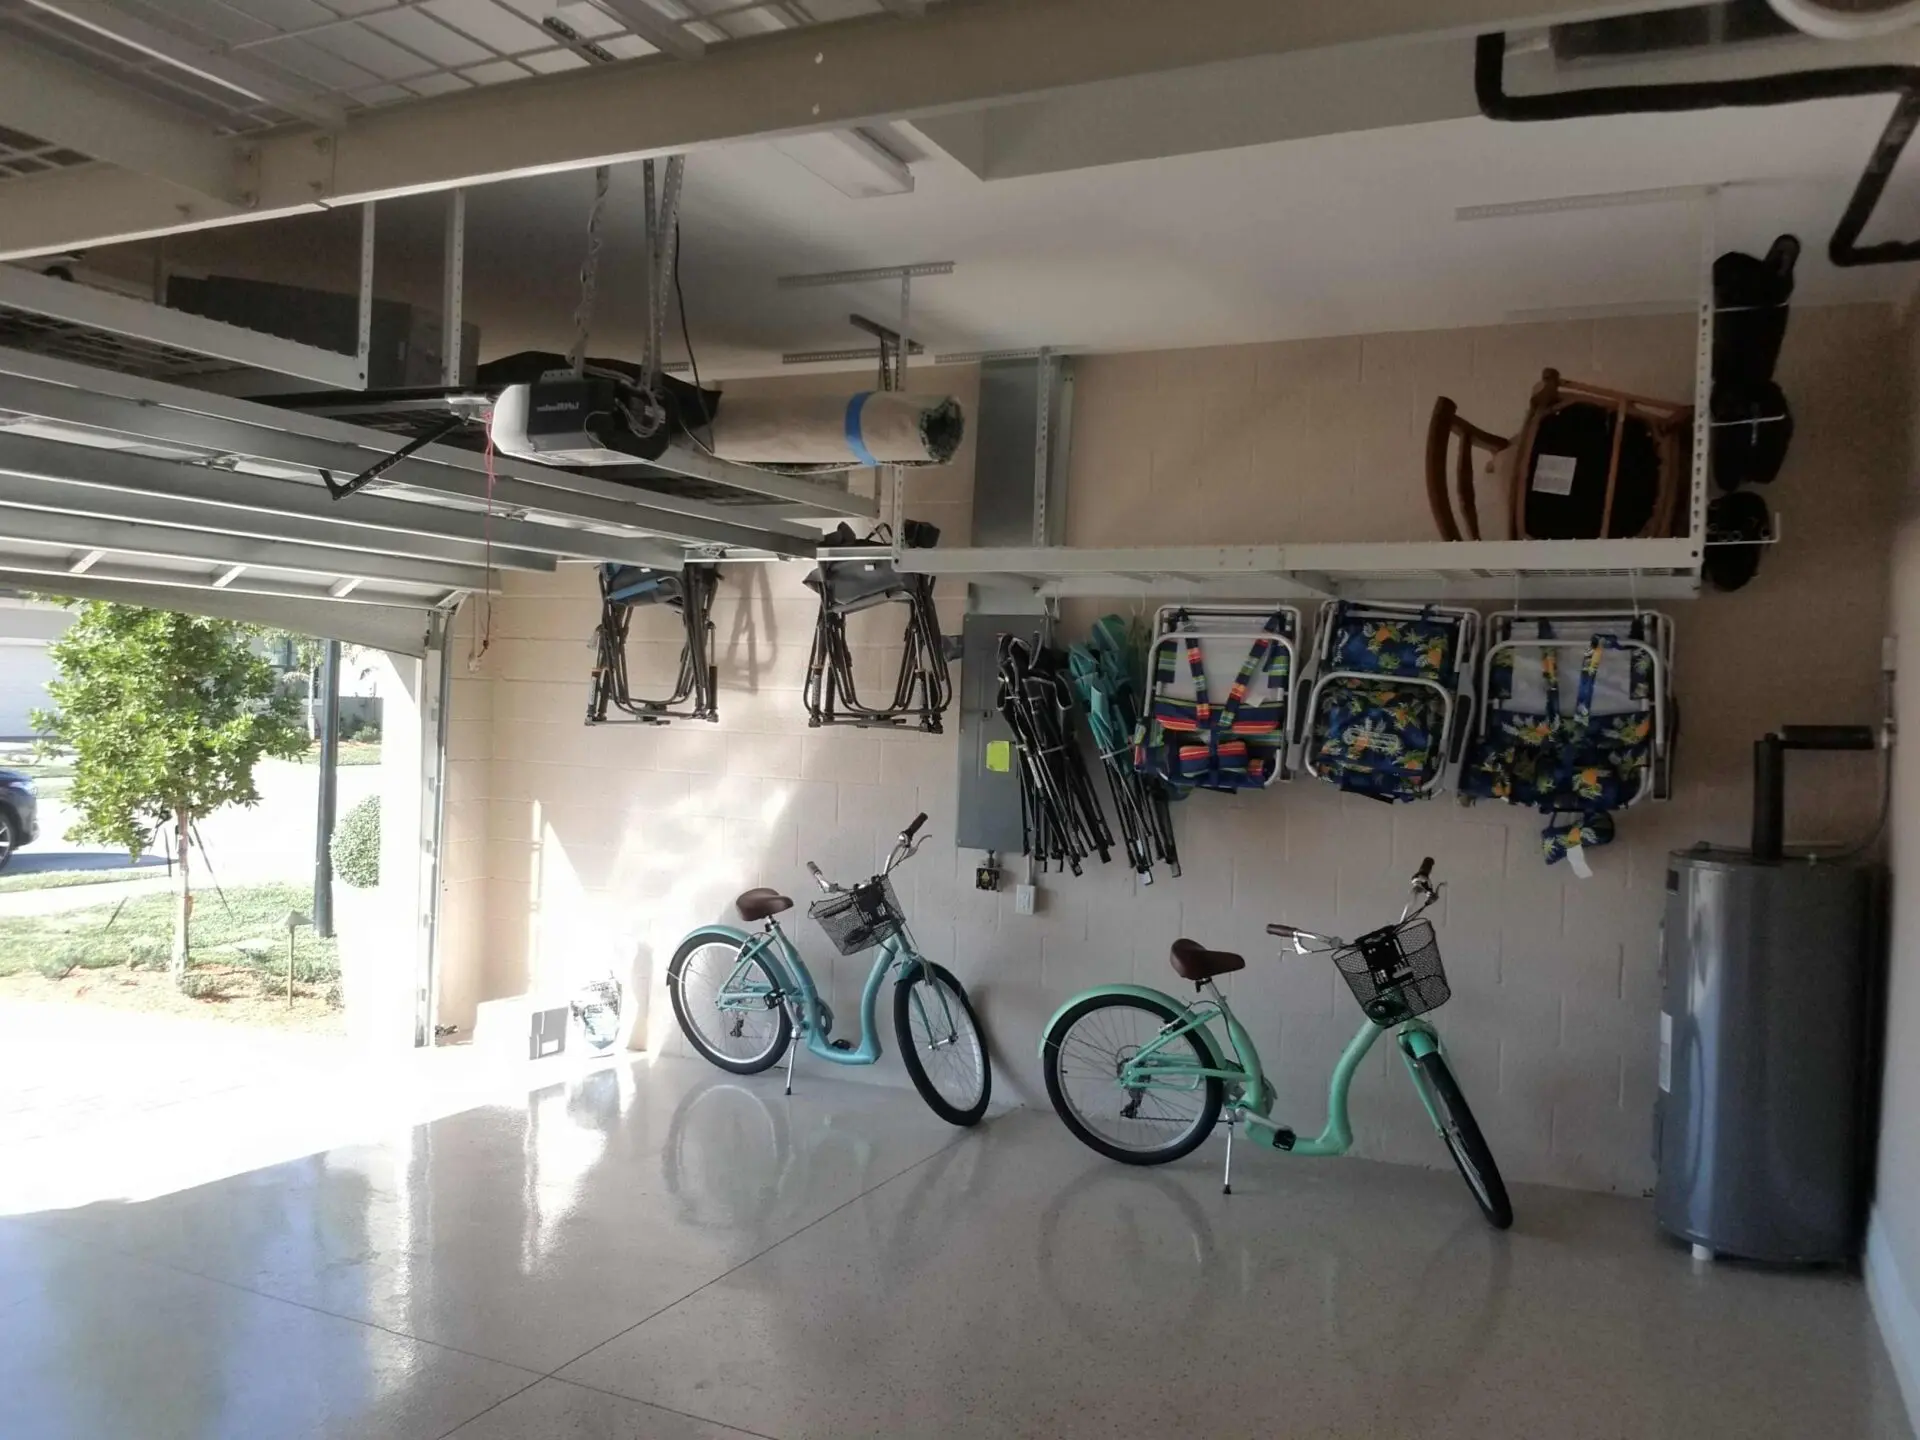 A garage with overhead storage, hooks for foldable chairs, and two bikes parked